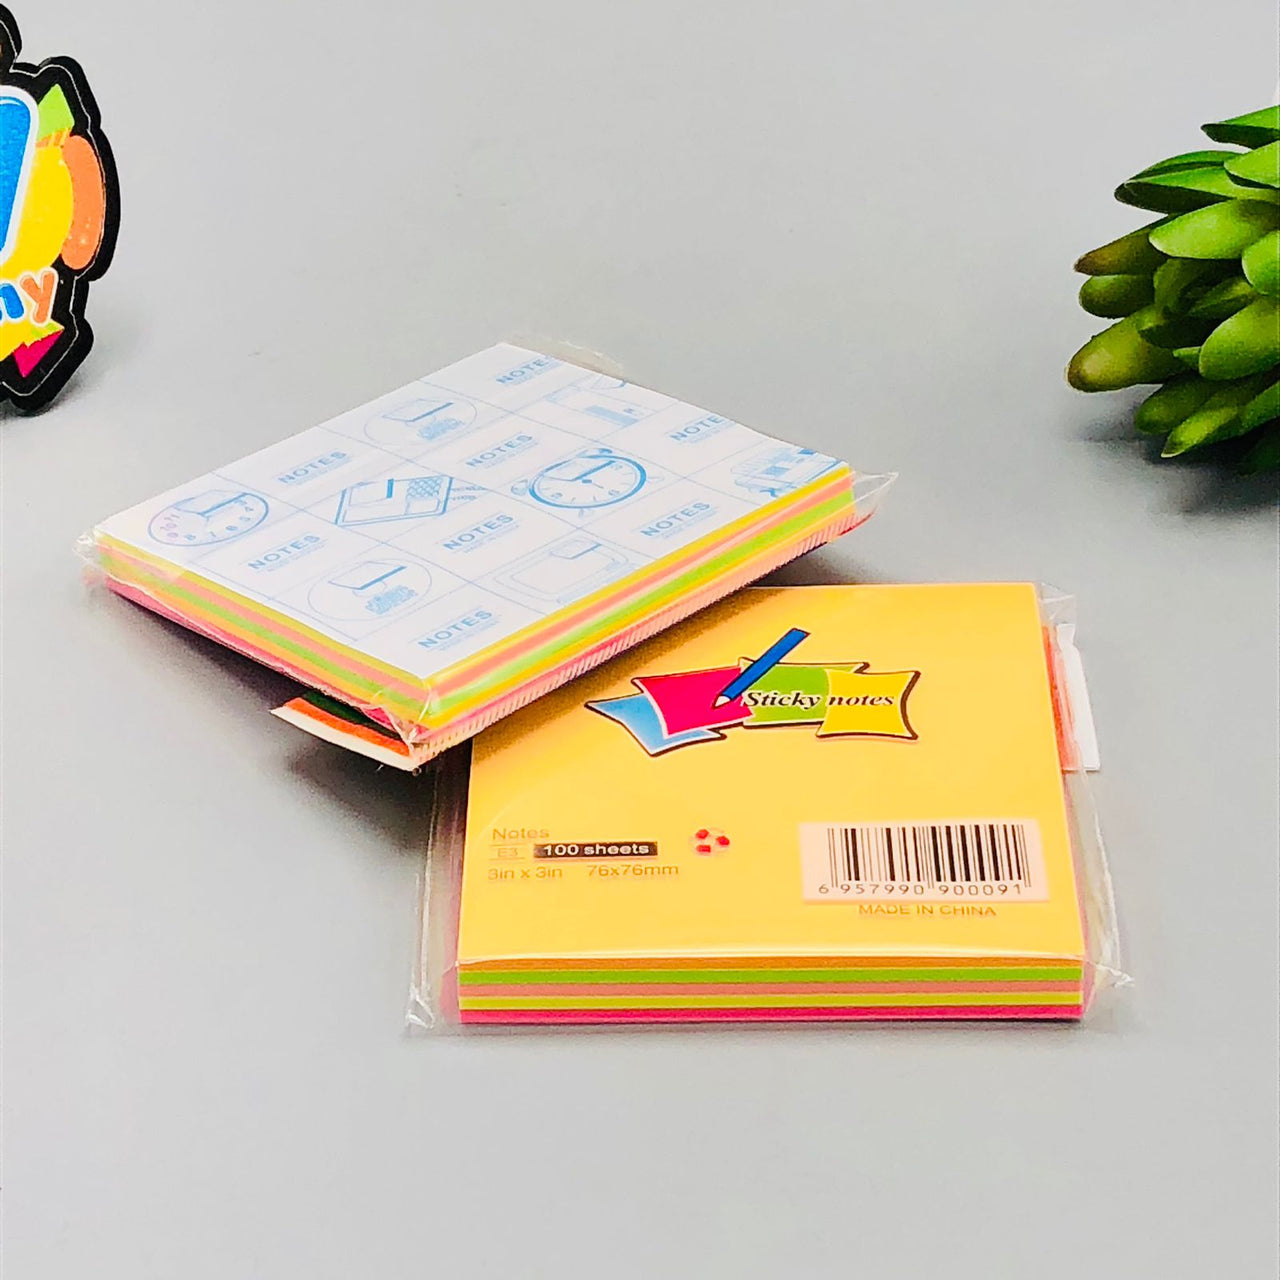 3x3 Inches Sticky Notes - 100 Sheets